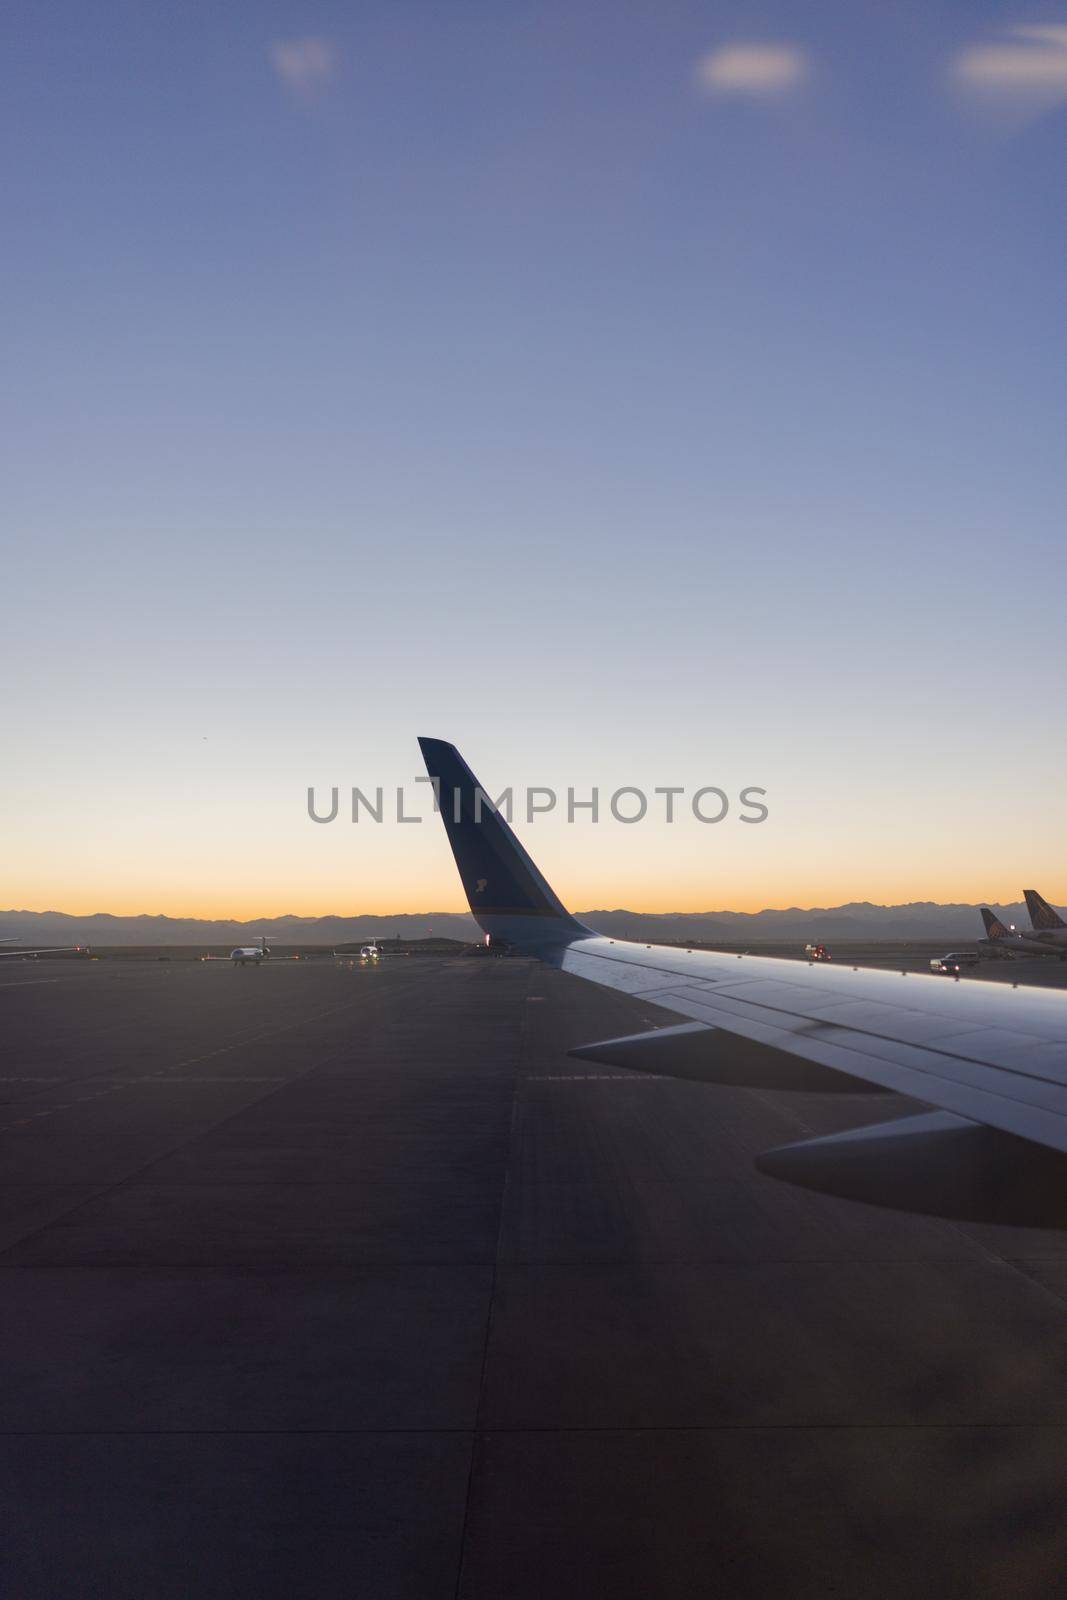 Beautiful dawn blue sky over parked planes at the airport by Kanelbulle